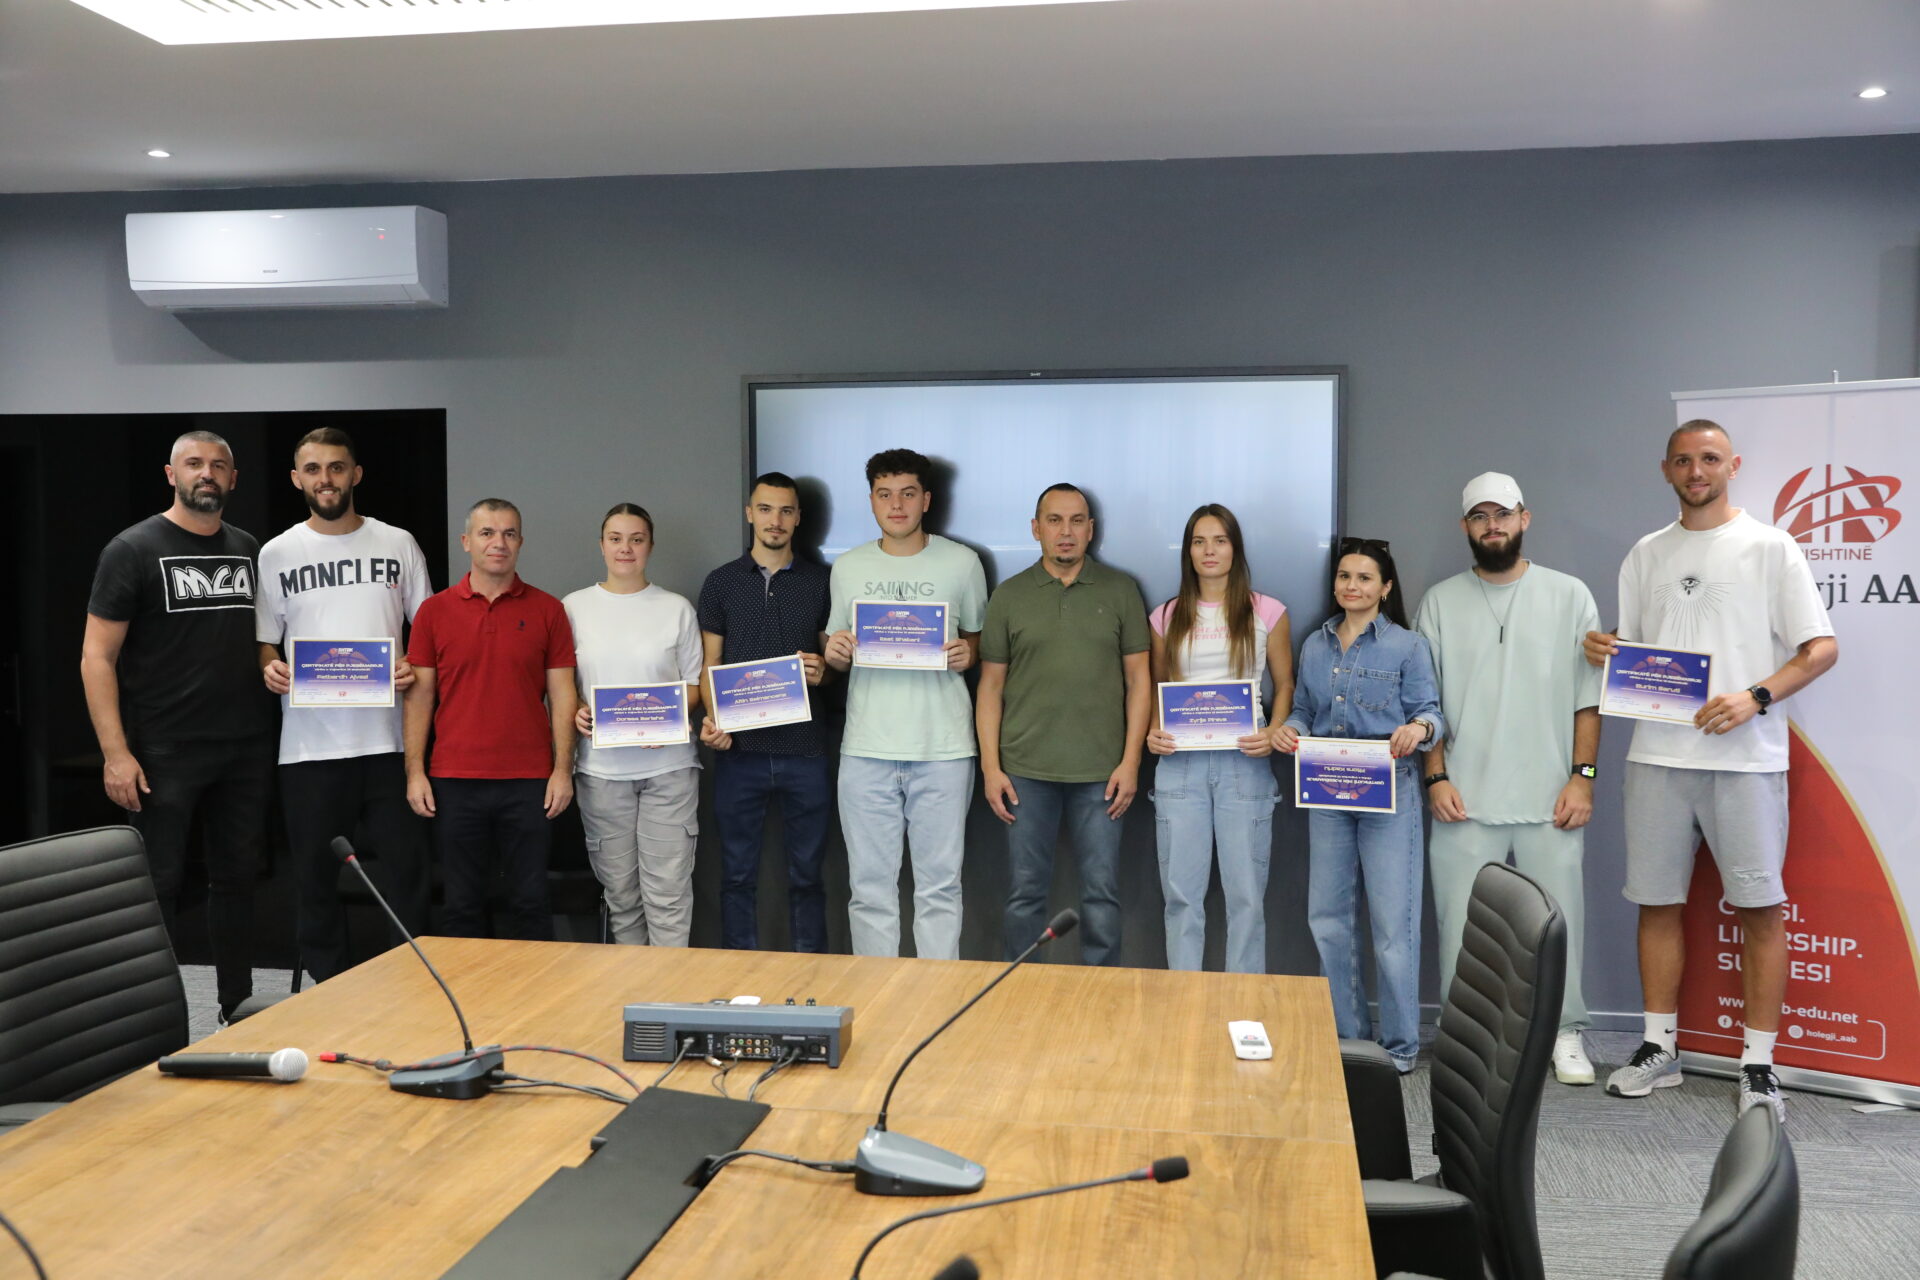 Students who participated in the training for basketball coaches are certified